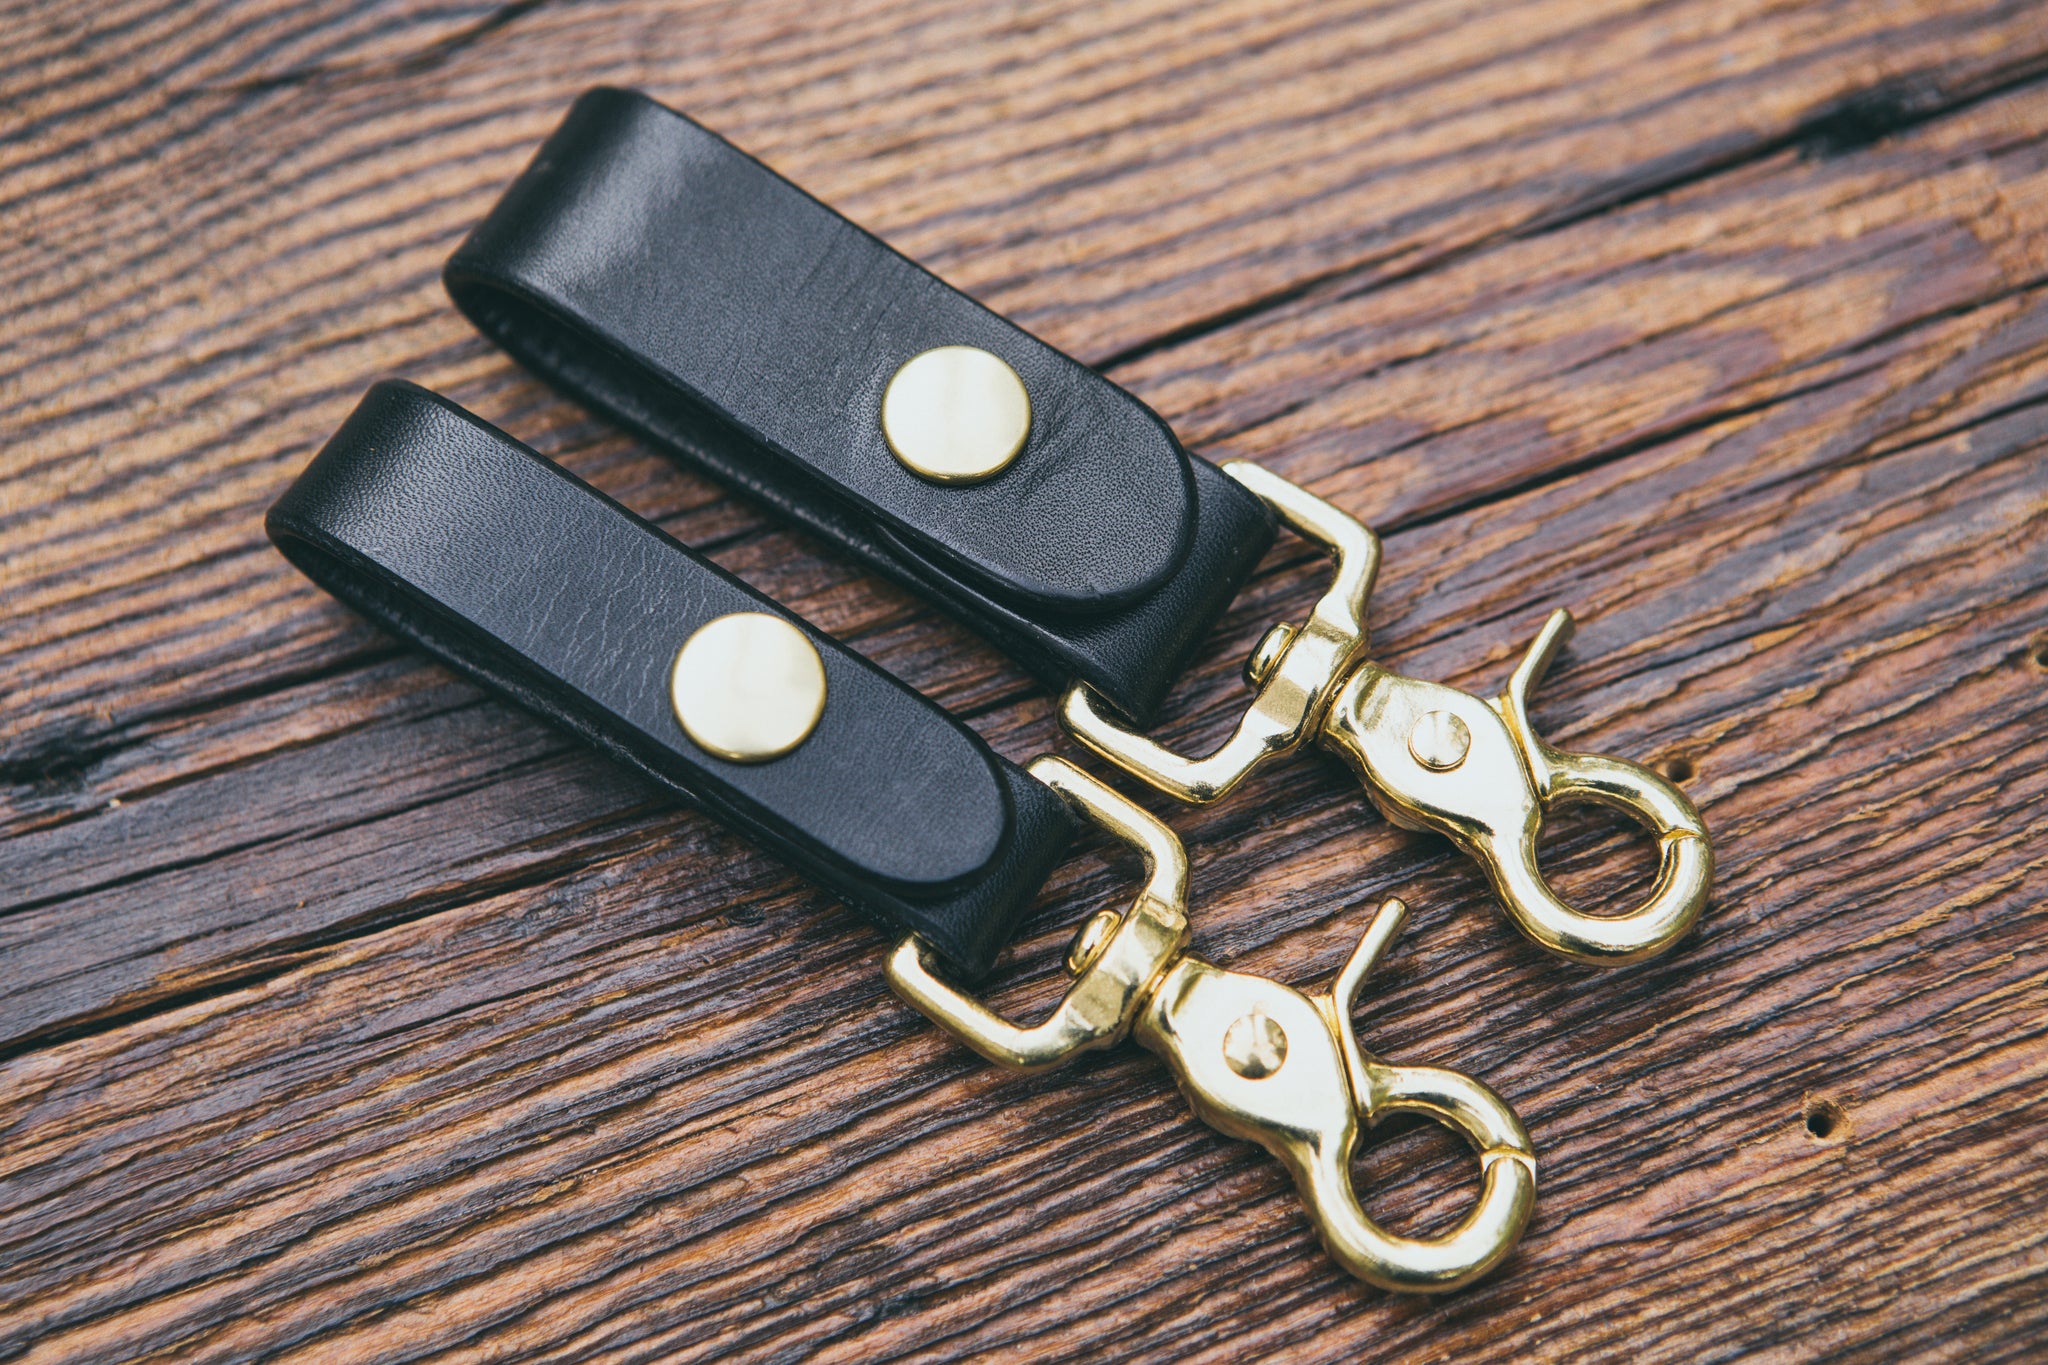 Snaps Leather Key Fob